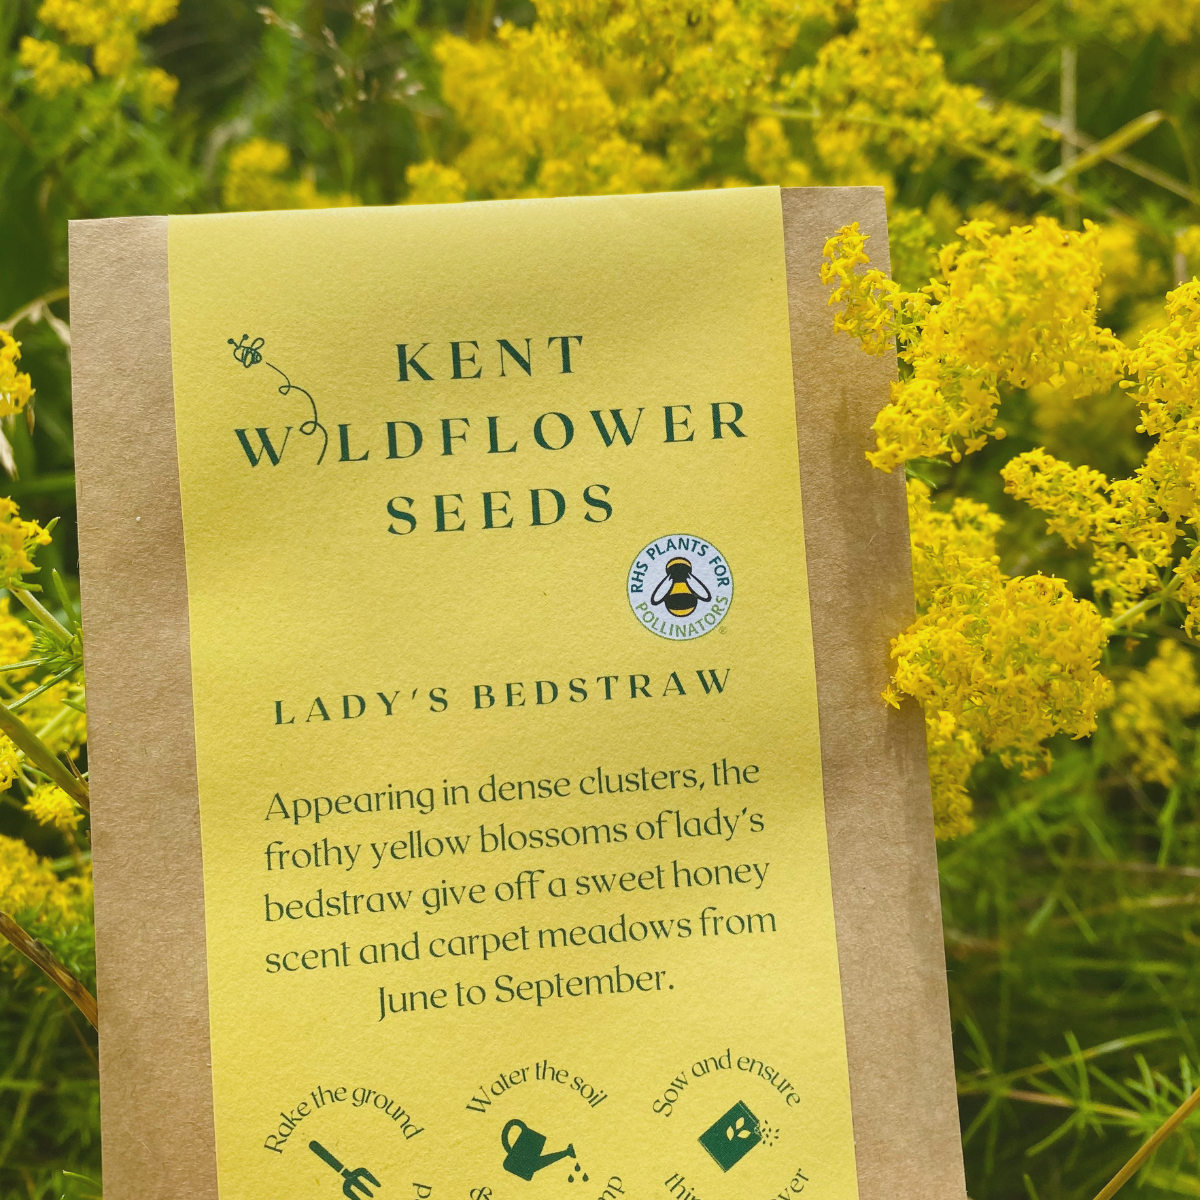 Native Lady's Bedstraw Seeds - Kent Wildflower Seeds